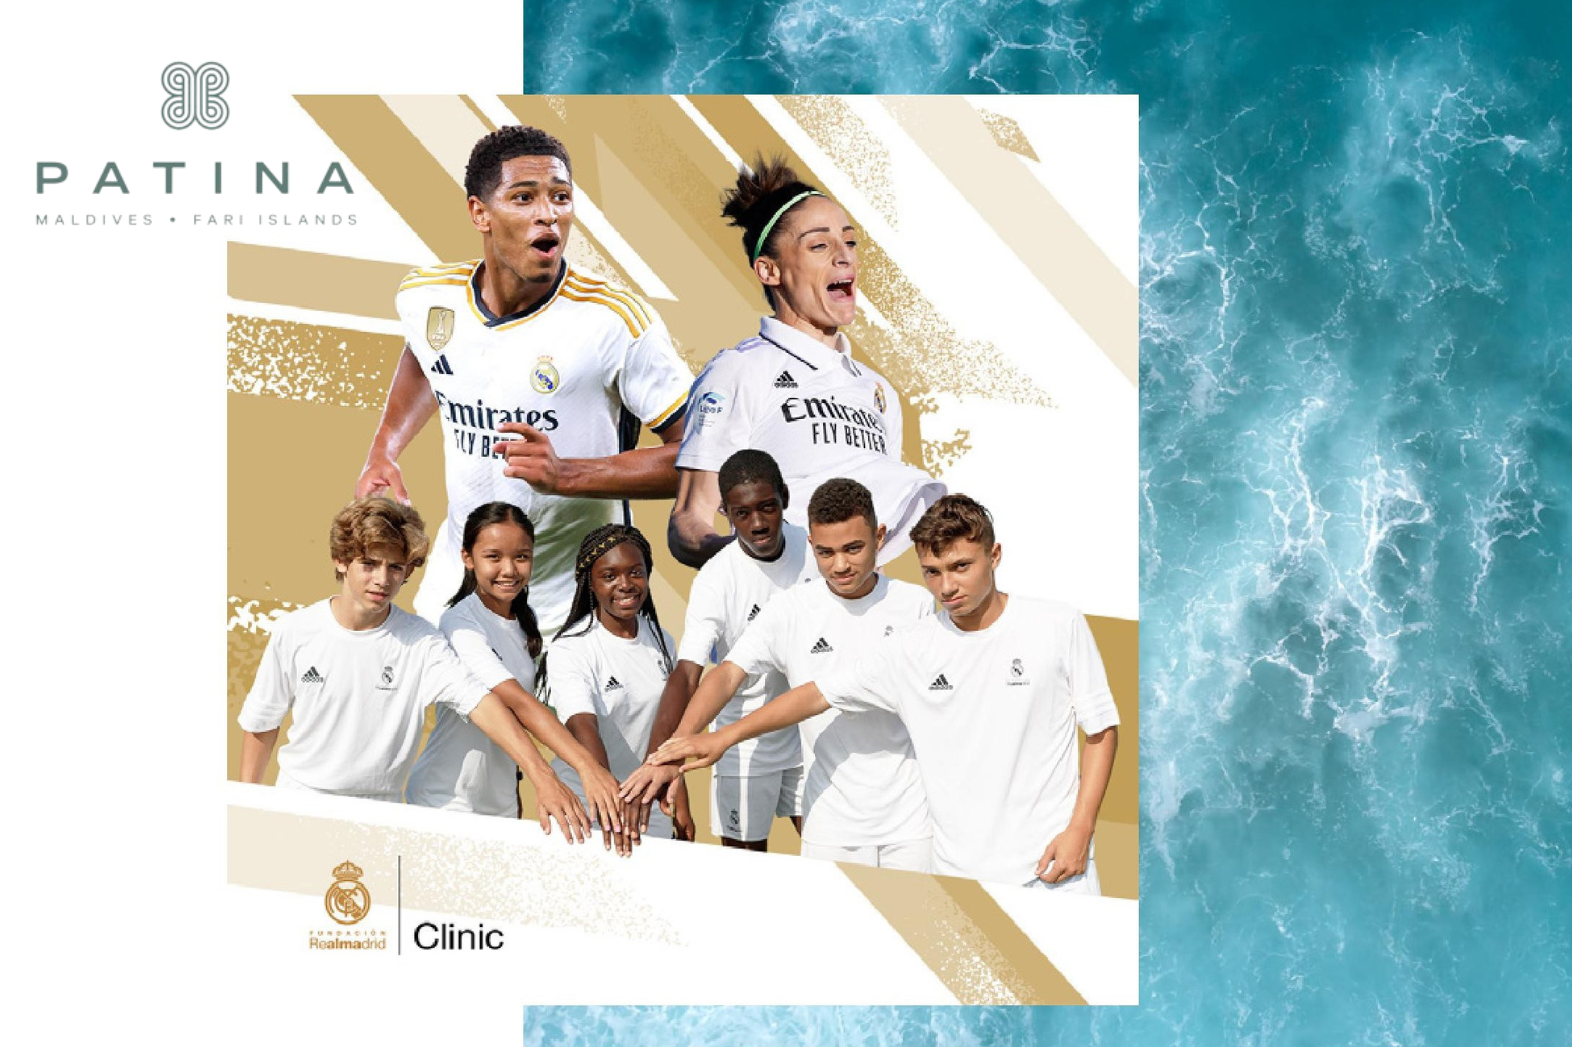 Maldives Madridistas: Patina Maldives, Fari Islands Partners with the Real Madrid Foundation for Exclusive Football Camp Experience